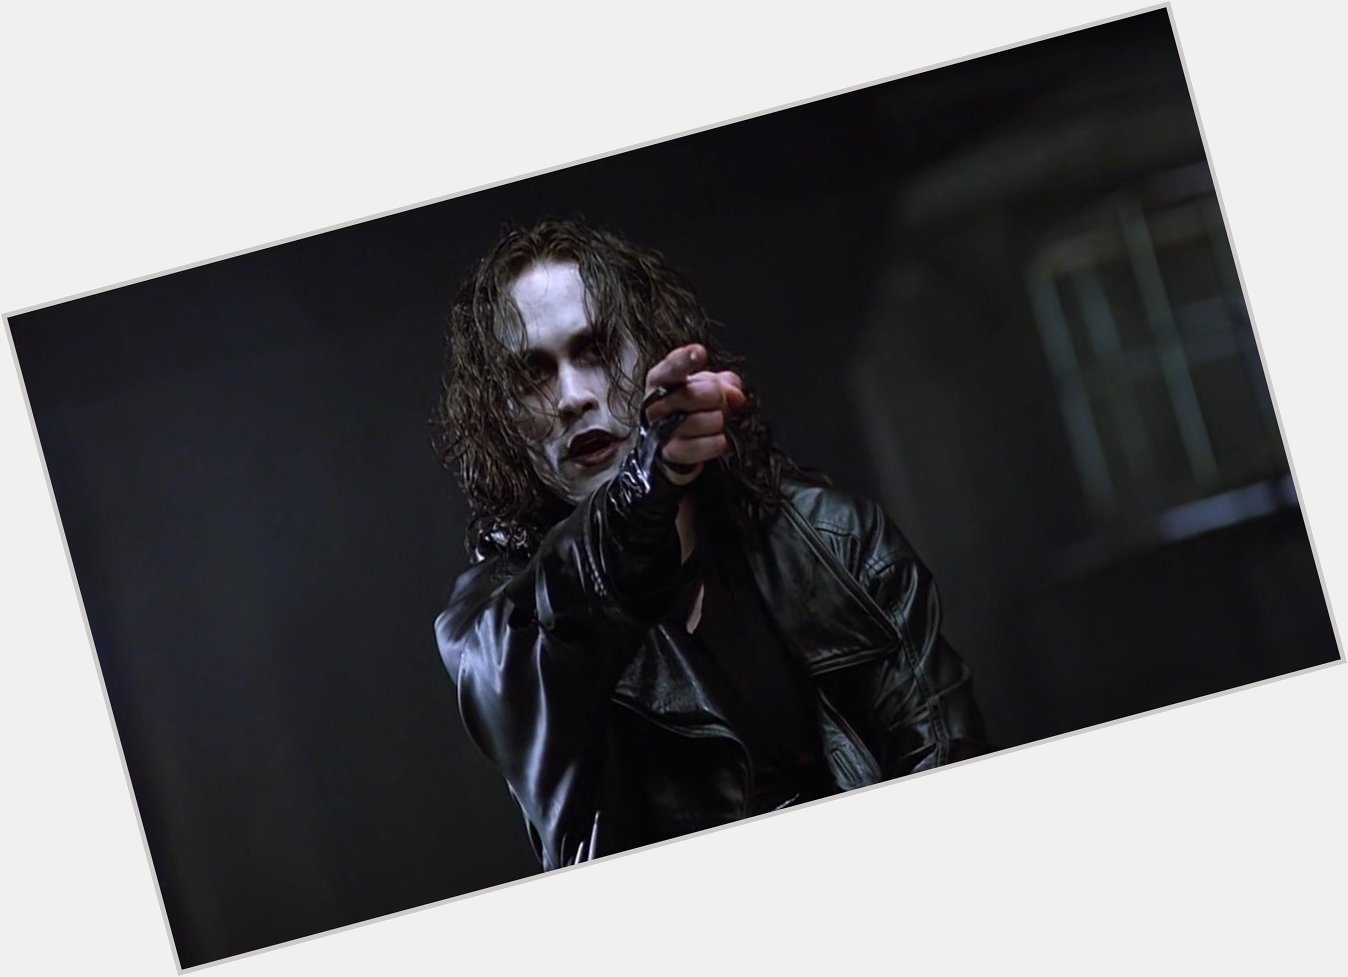 Happy Birthday to Brandon Lee on what would have been his 54th birthday.  